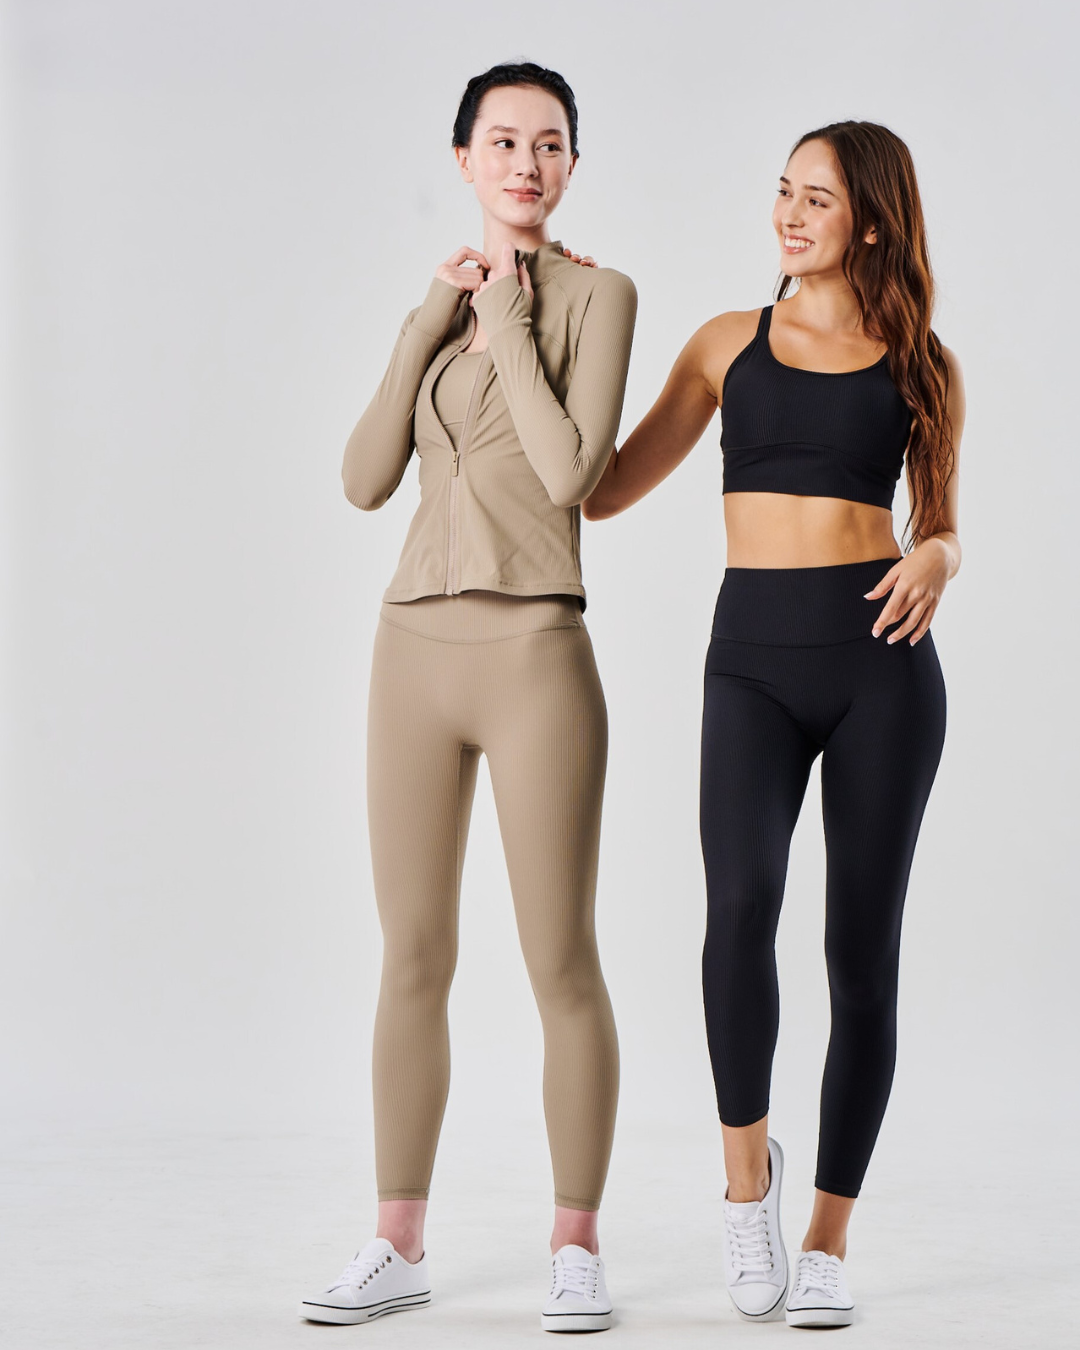 Your favorite activewear is showing signs of pilling and abrasion. What can you do now?